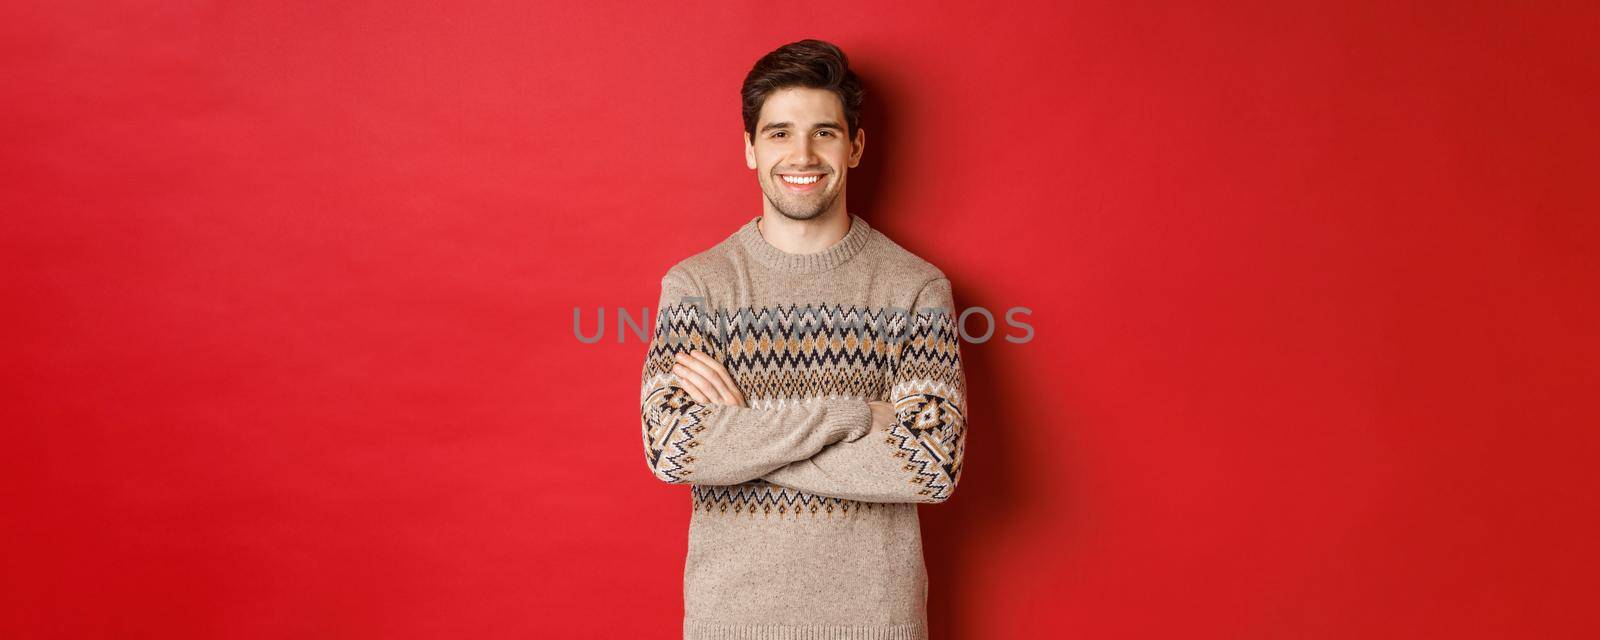 Image of handsome happy guy in christmas sweater, smiling and looking at camera, celebrating xmas holidays, standing over red background.